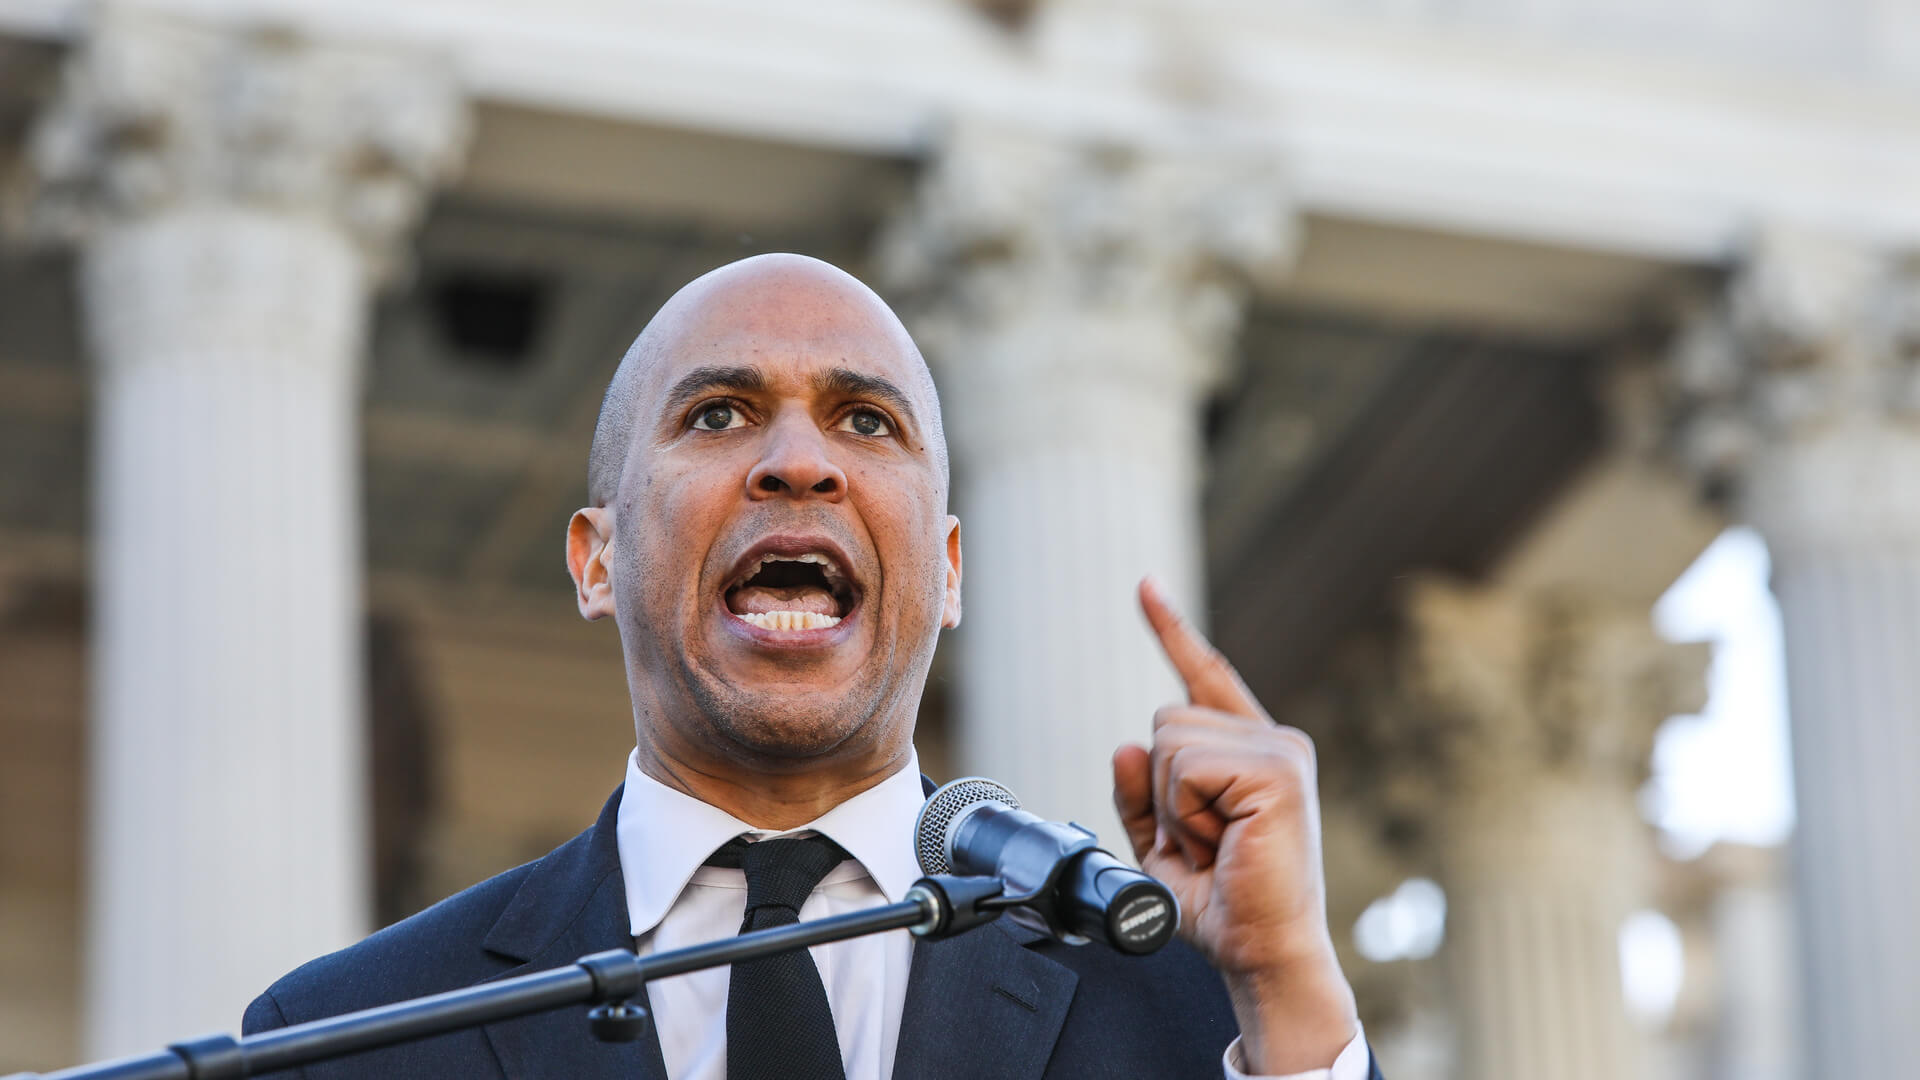 Cory Booker addresses a large crowd at the 19th annual King Day at the Dome Rally